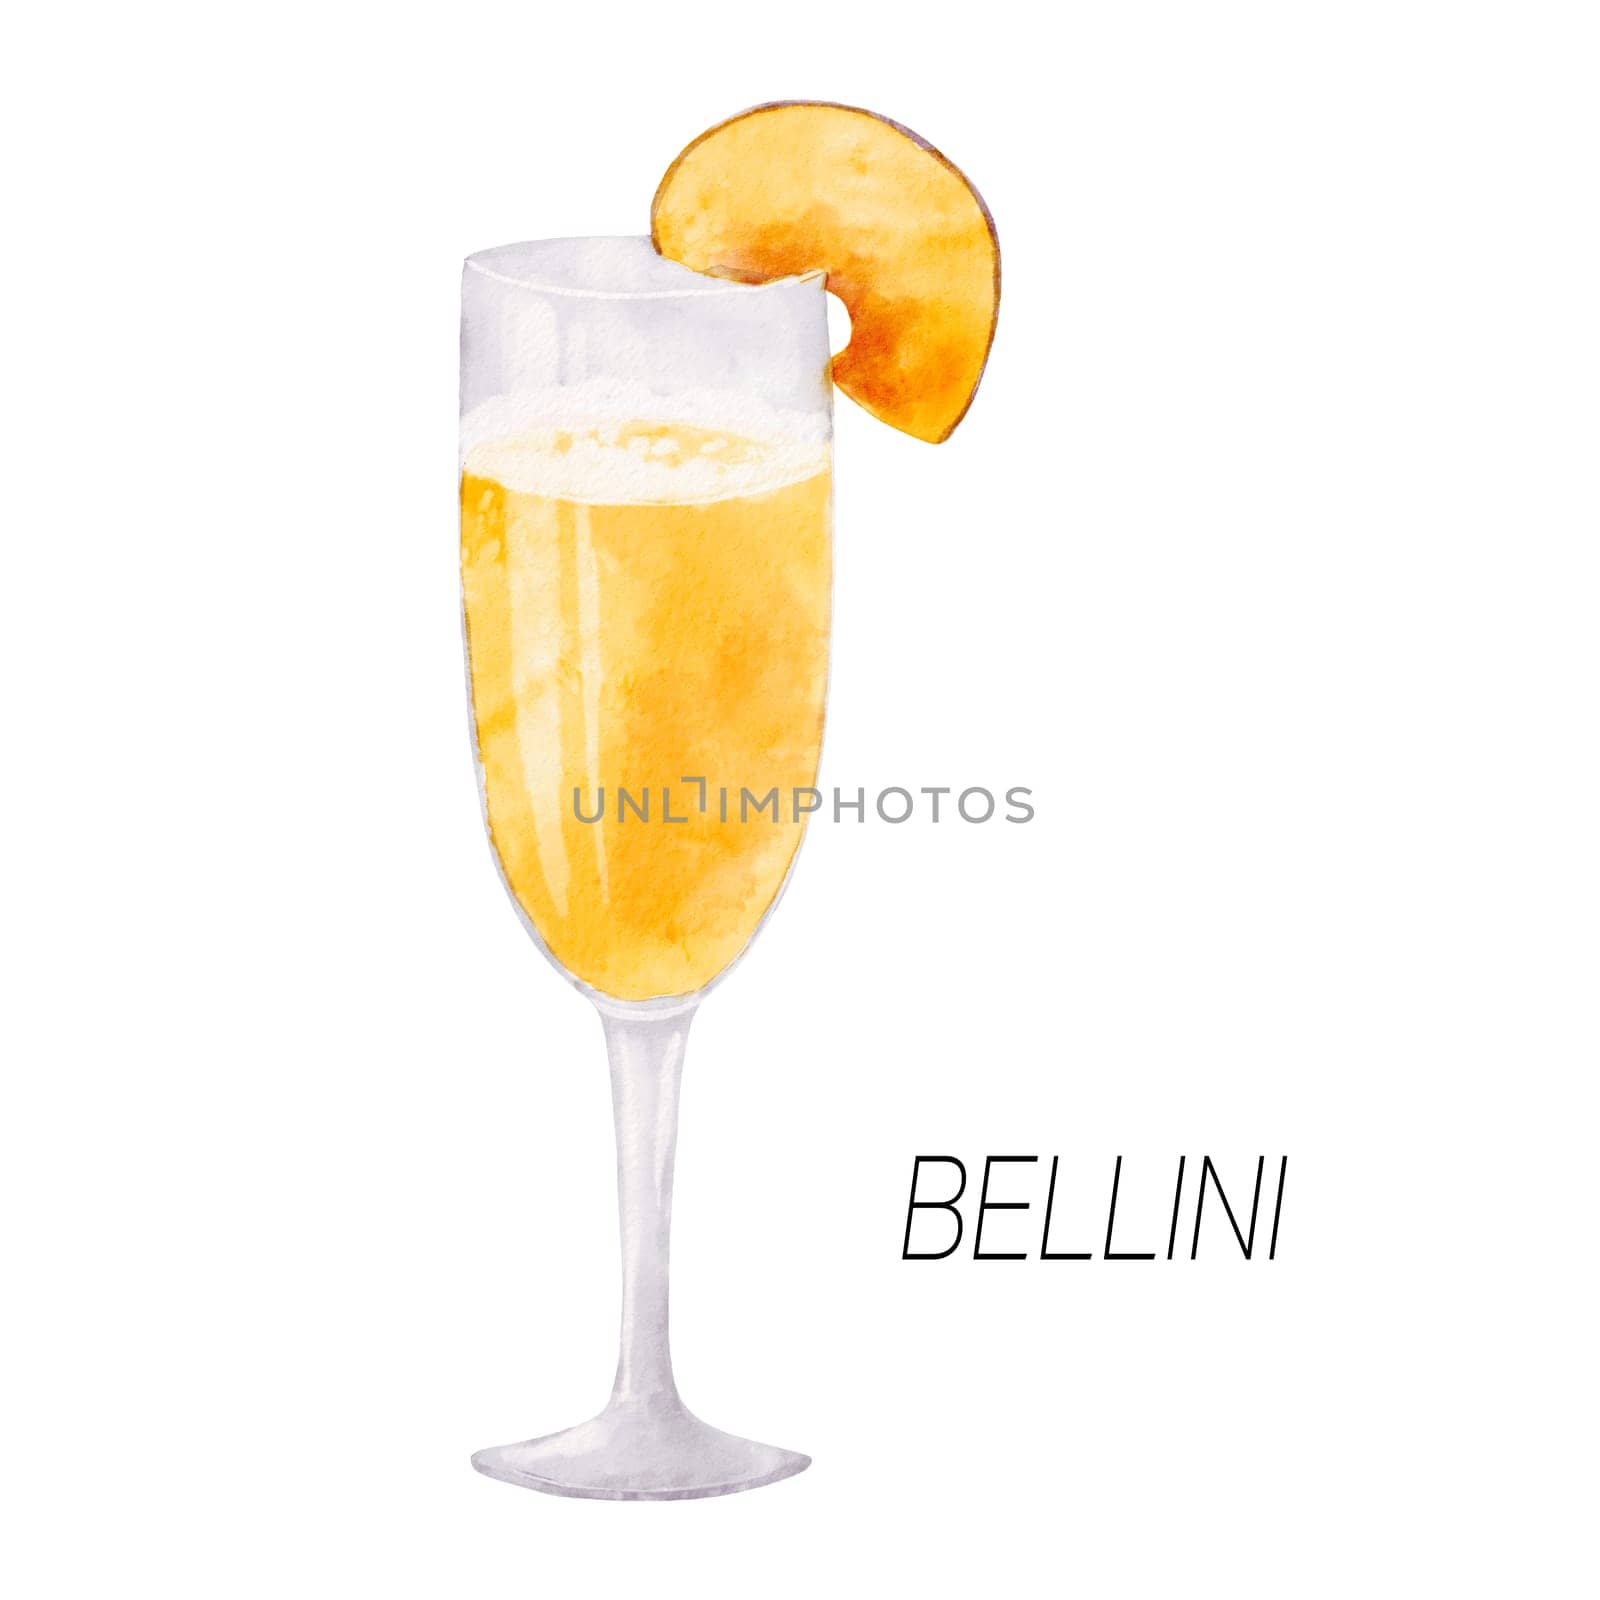 Bellini cocktail. Watercolor illustration of drink in glass isolated on white background